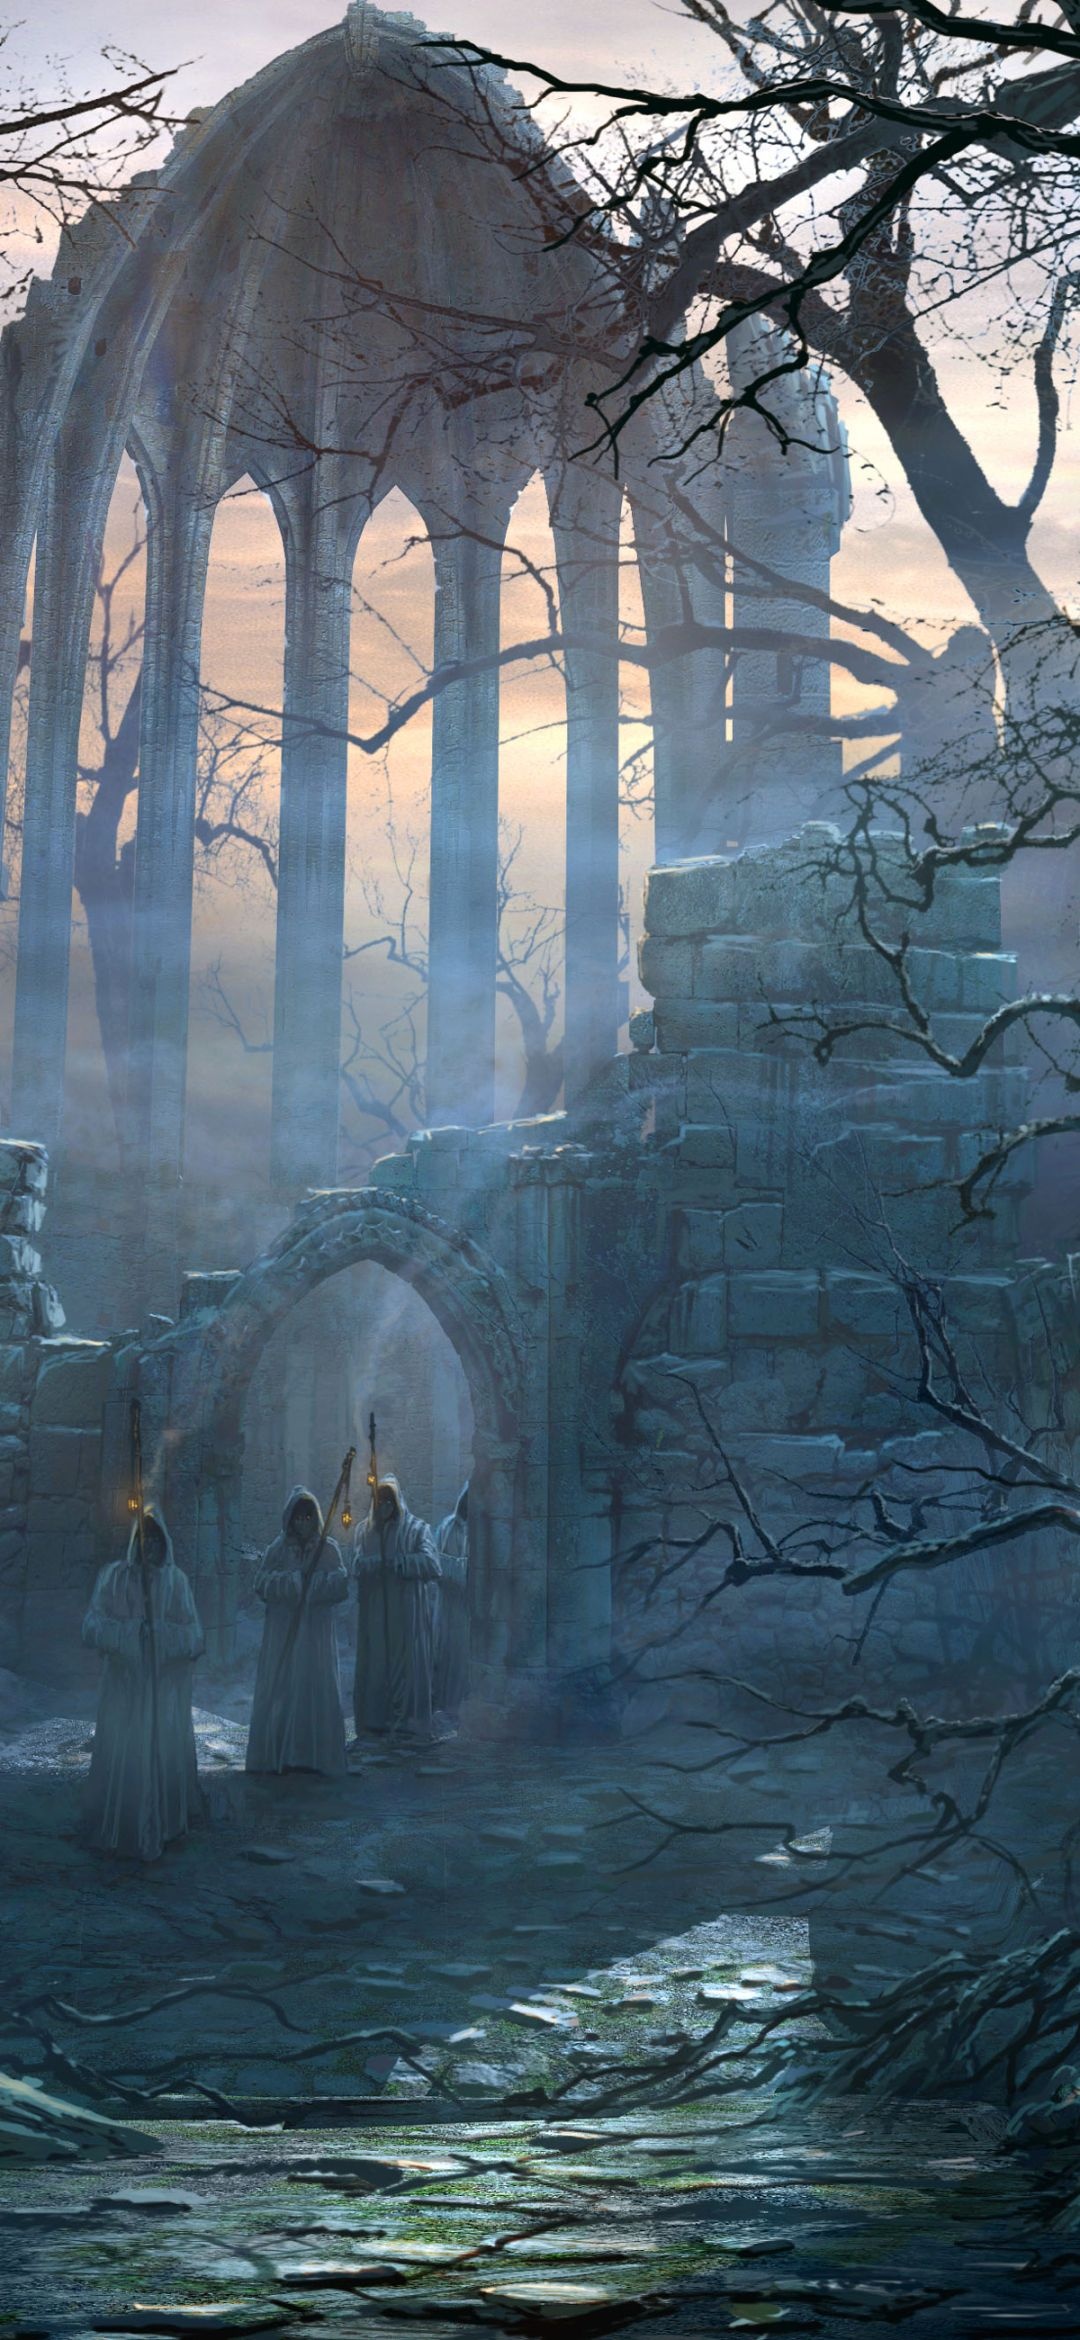 Gothic Art: Ruined temple, Monks, Abandoned place, Fantasy architecture, Mystical atmosphere. 1080x2340 HD Wallpaper.